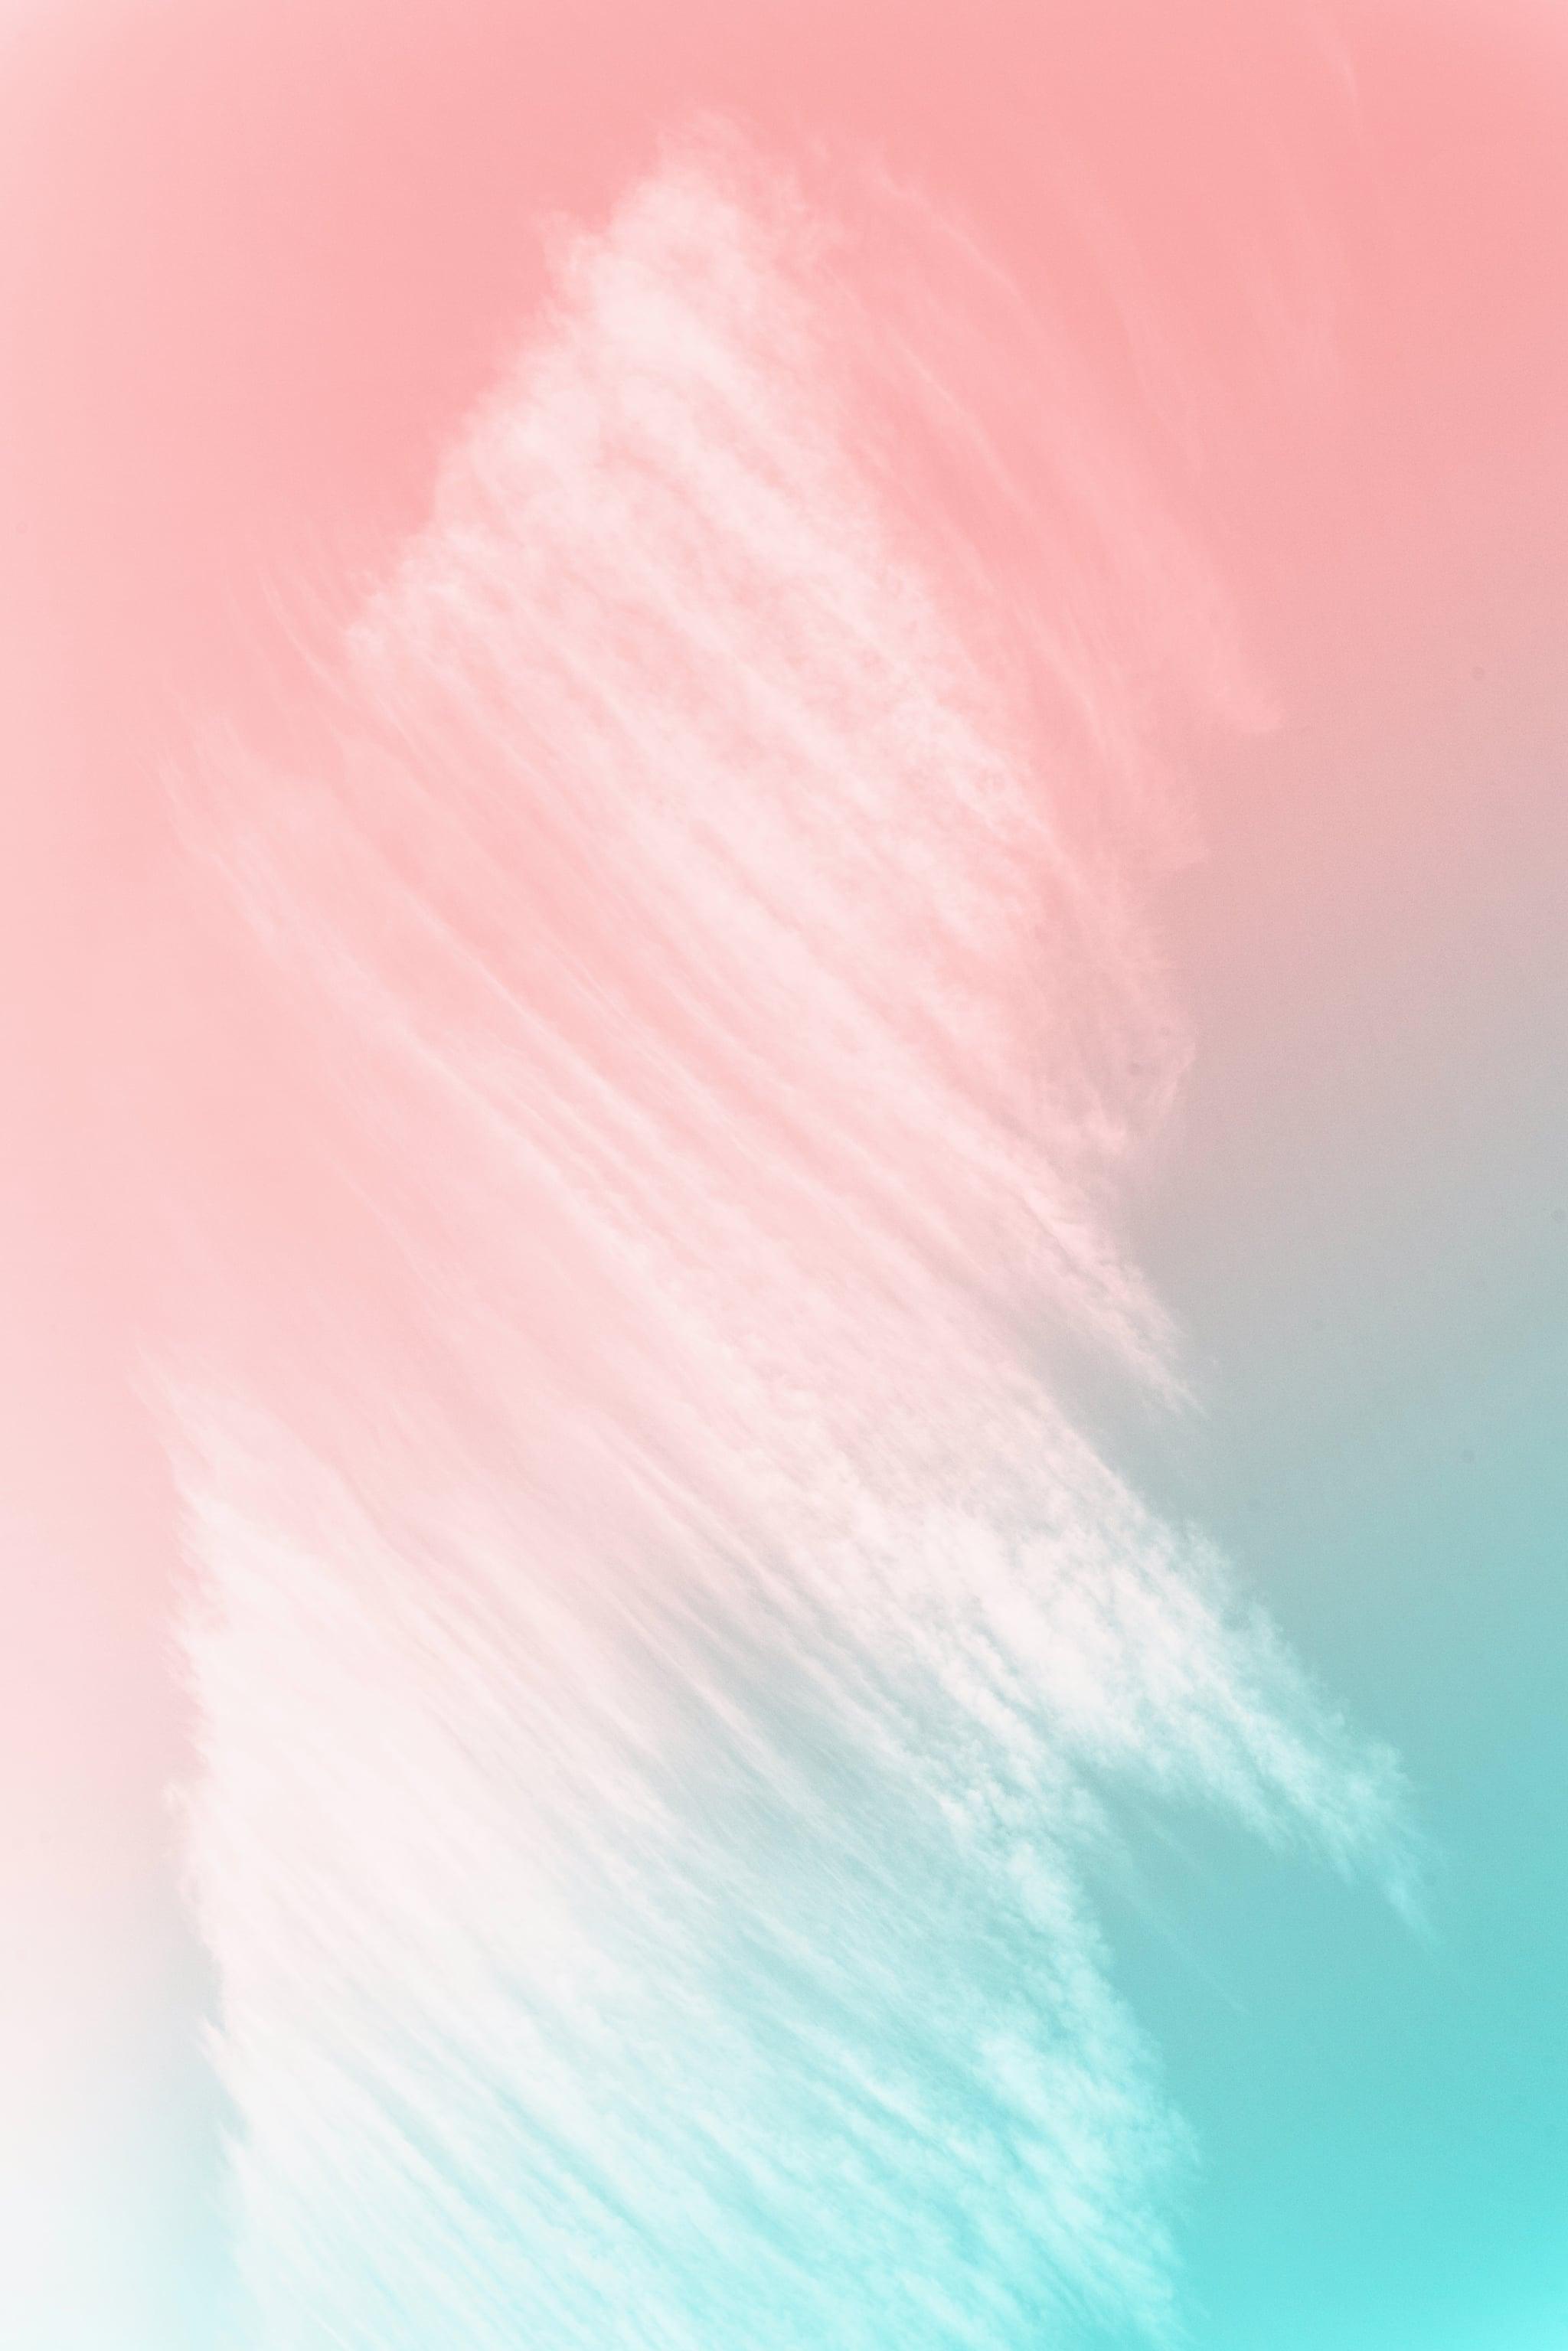 Pastel iPhone Wallpaper The Best Ideas That Ll Make